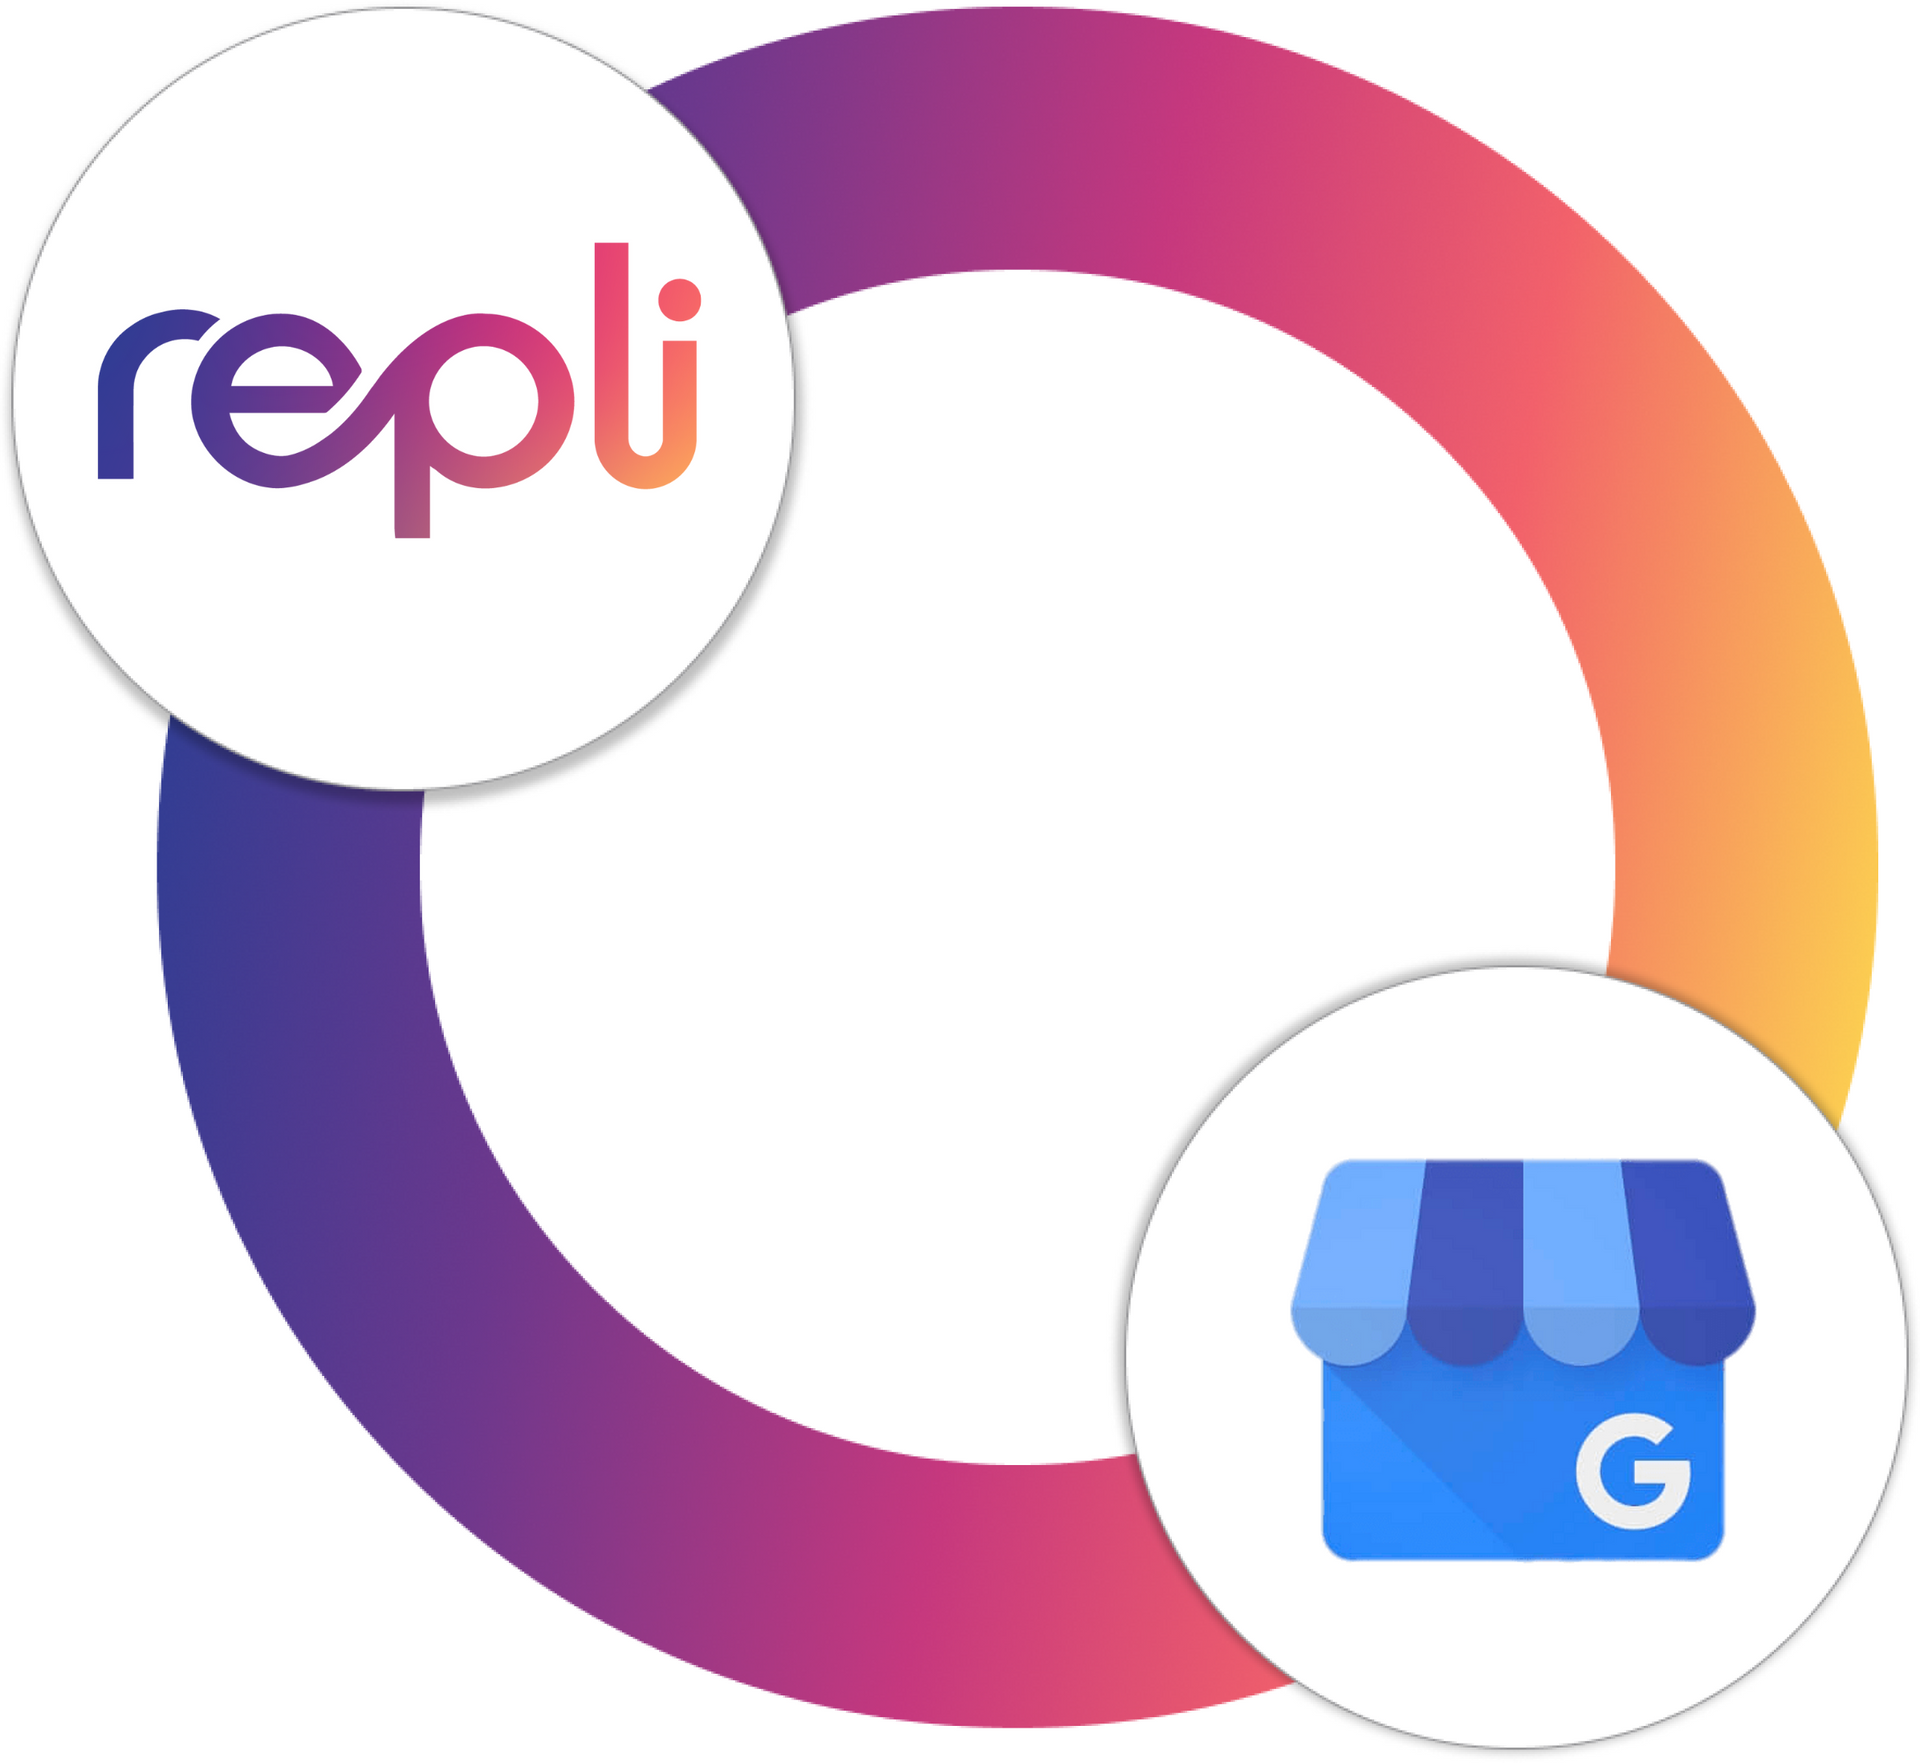 A colorful circle with the Repli logo and Google Business Profile logo on it.